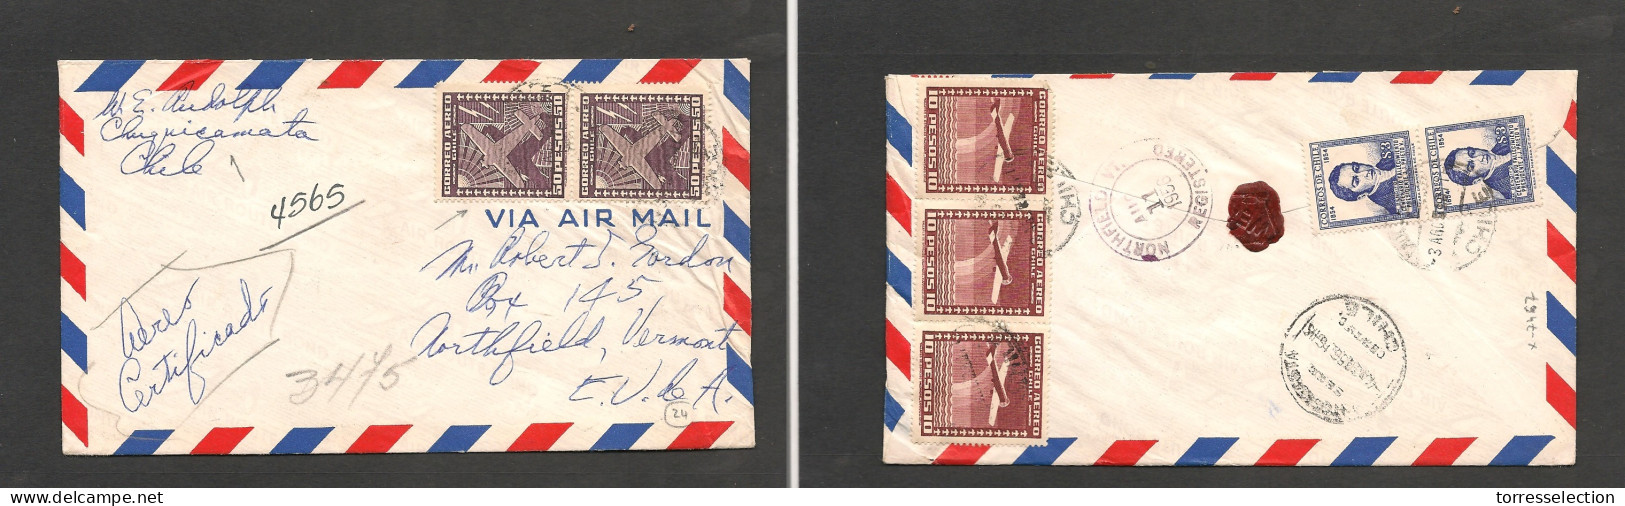 CHILE. Chile - Cover - 1956 4 Ago Antofagasta To USA Northfield Vermont Air $136 Rate Incl 2x50 Pesos Stamps On Very Lat - Cile